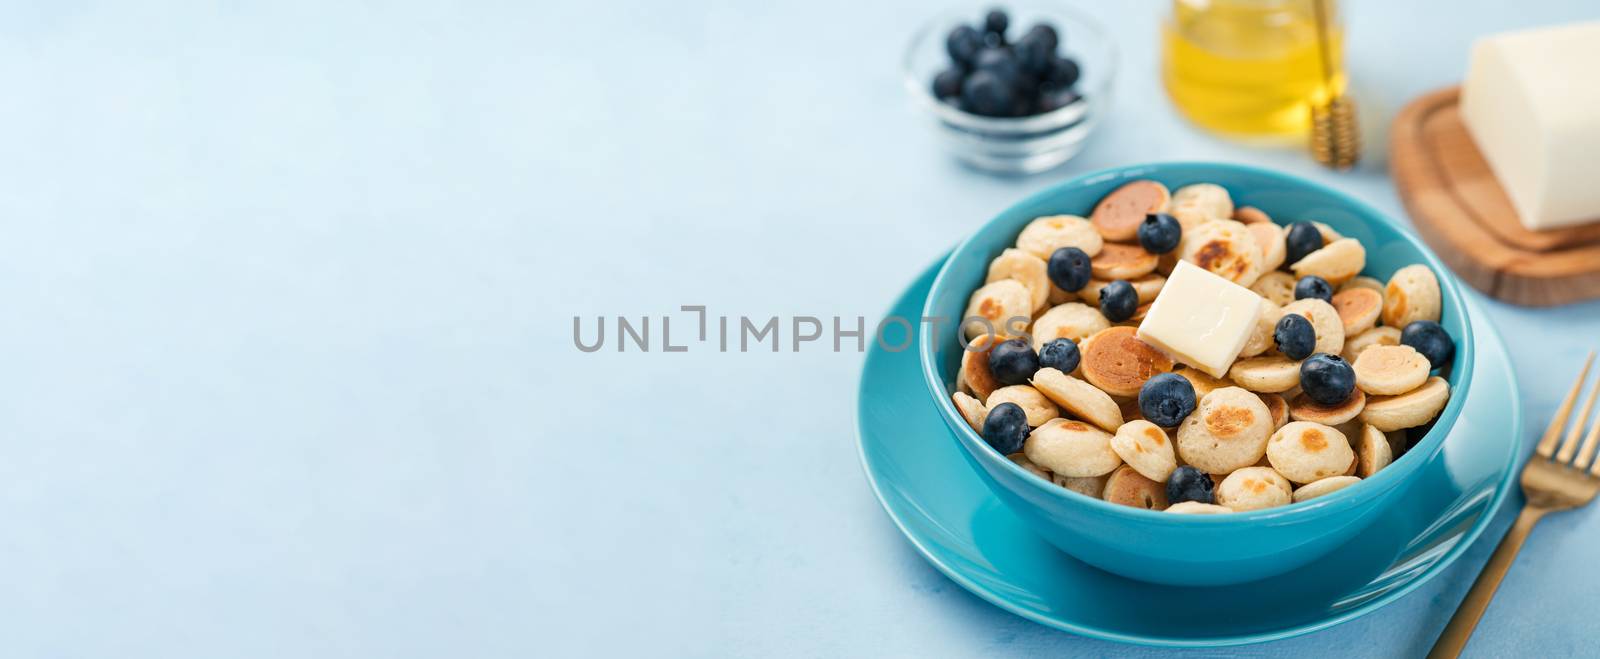 Trendy food - pancake cereal. Heap of mini cereal pancakes in boul on blue background. Copy space for text or design. Long horizontal banner